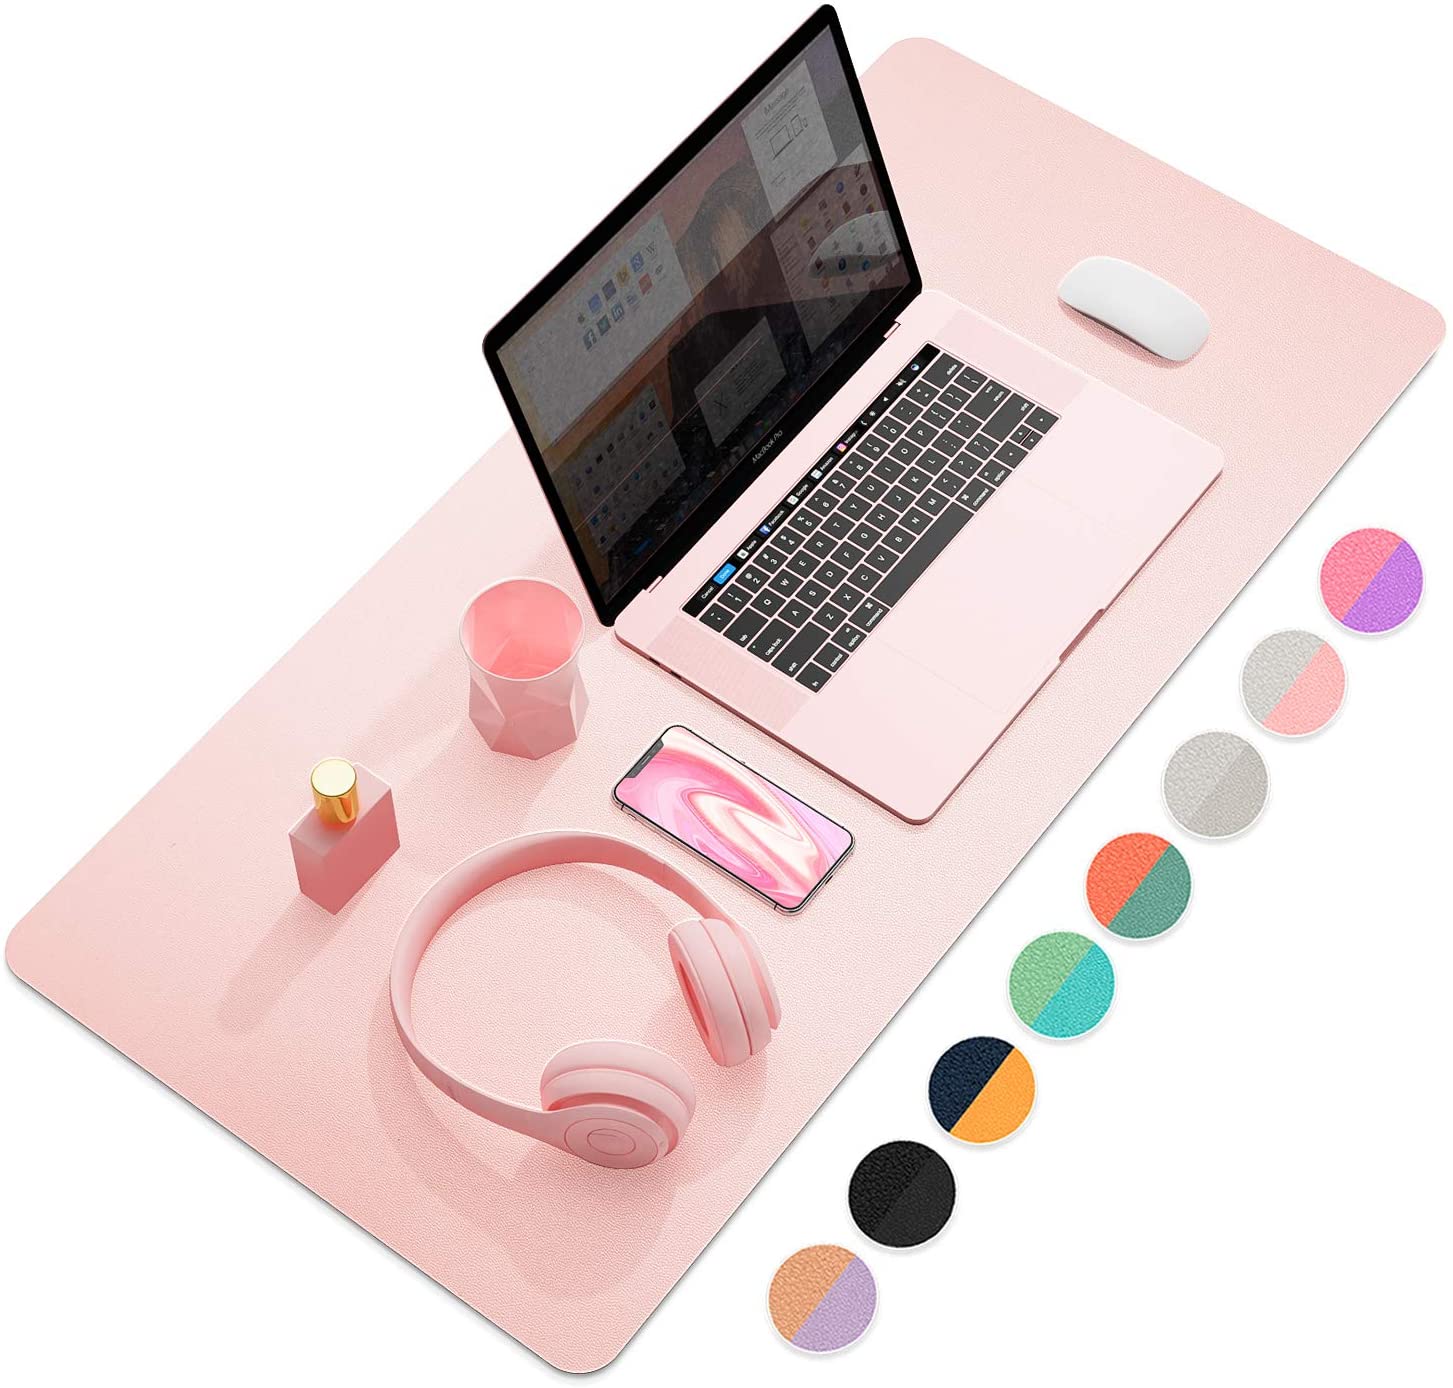 Do you need a desk pad to set up a productive workspace at home